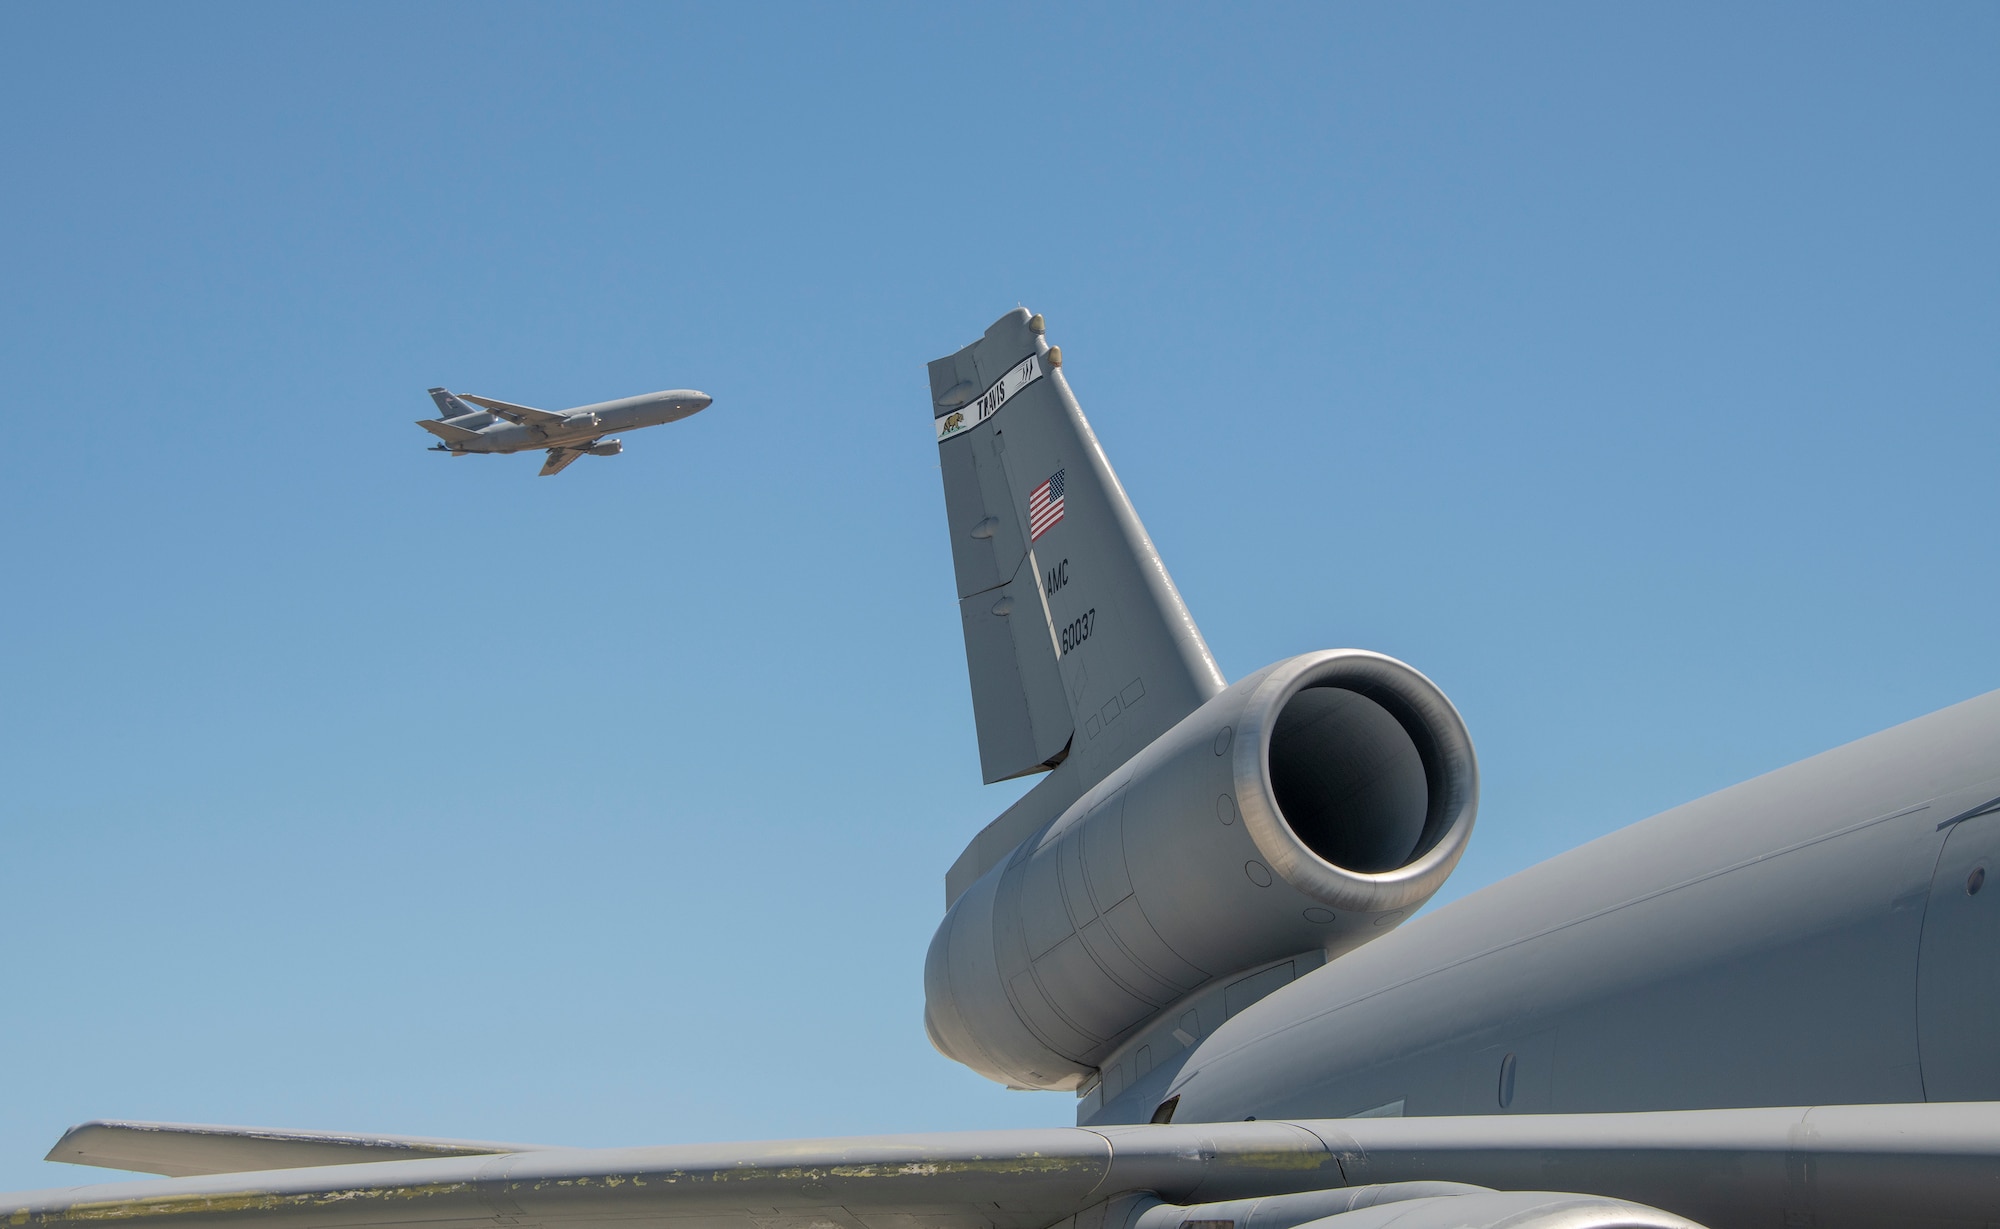 U.S. Air Force KC-10 Extender rests on the flight line July 11, 2019 at Travis Air Force Base, California. Although the KC-l0’s primary mission is aerial refueling, it can combine the tasks of a tanker and cargo aircraft by refueling fighters while simultaneously carrying support personnel and equipment. (U.S. Air Force photo by Heide Couch)